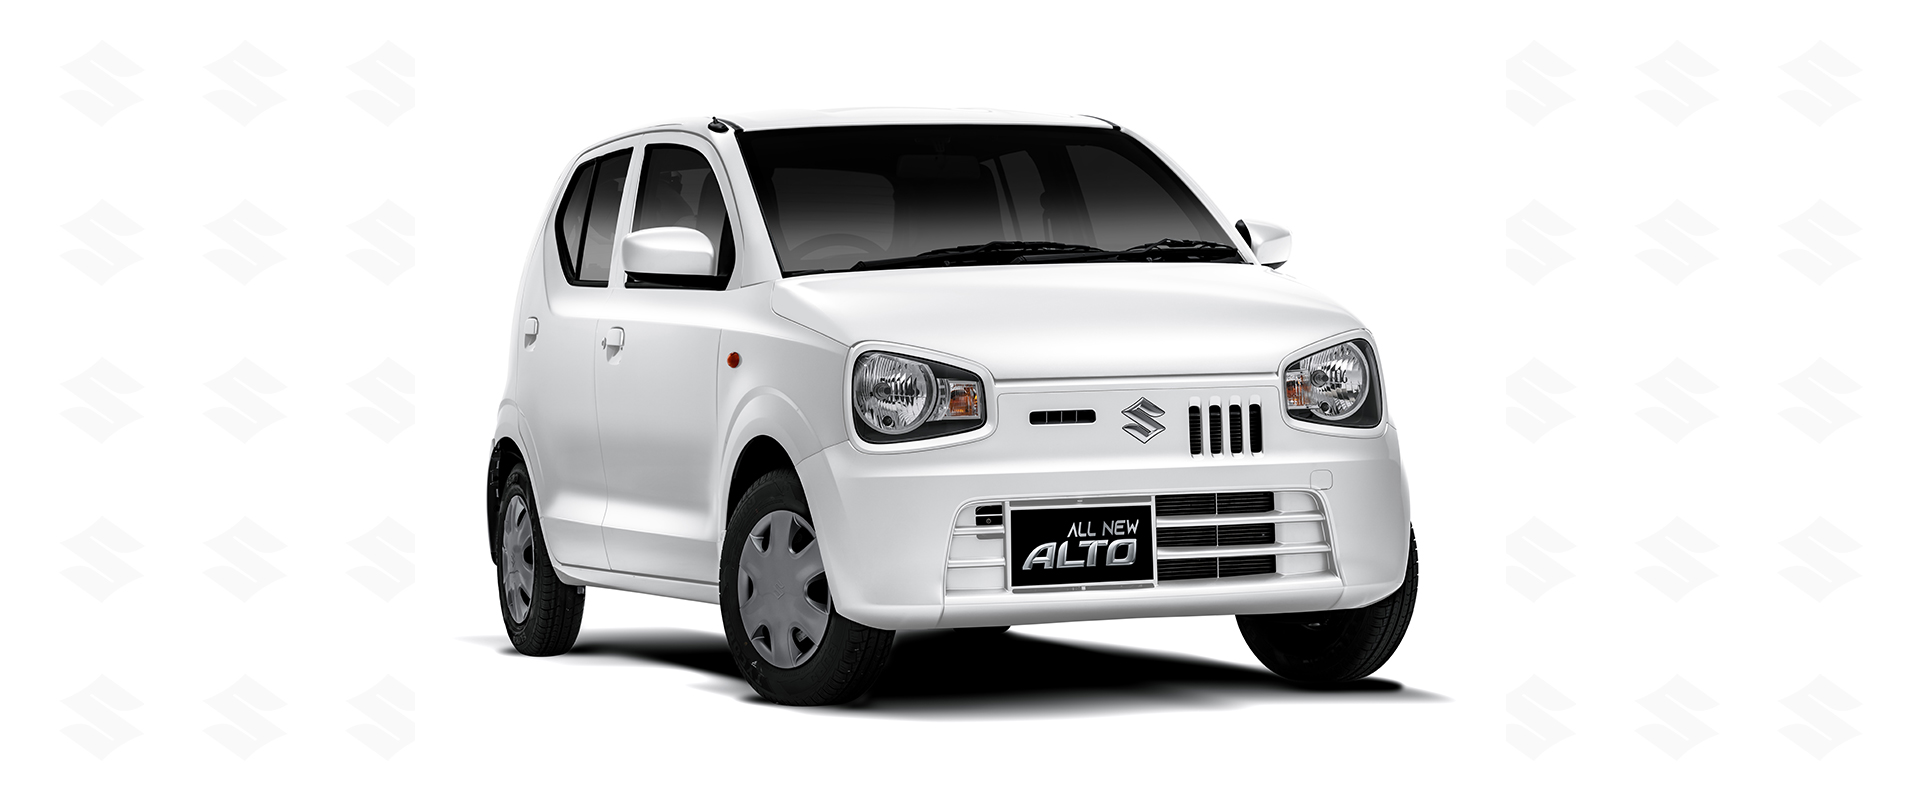 New Suzuki Alto With 660cc Engine Launched In Pakistan